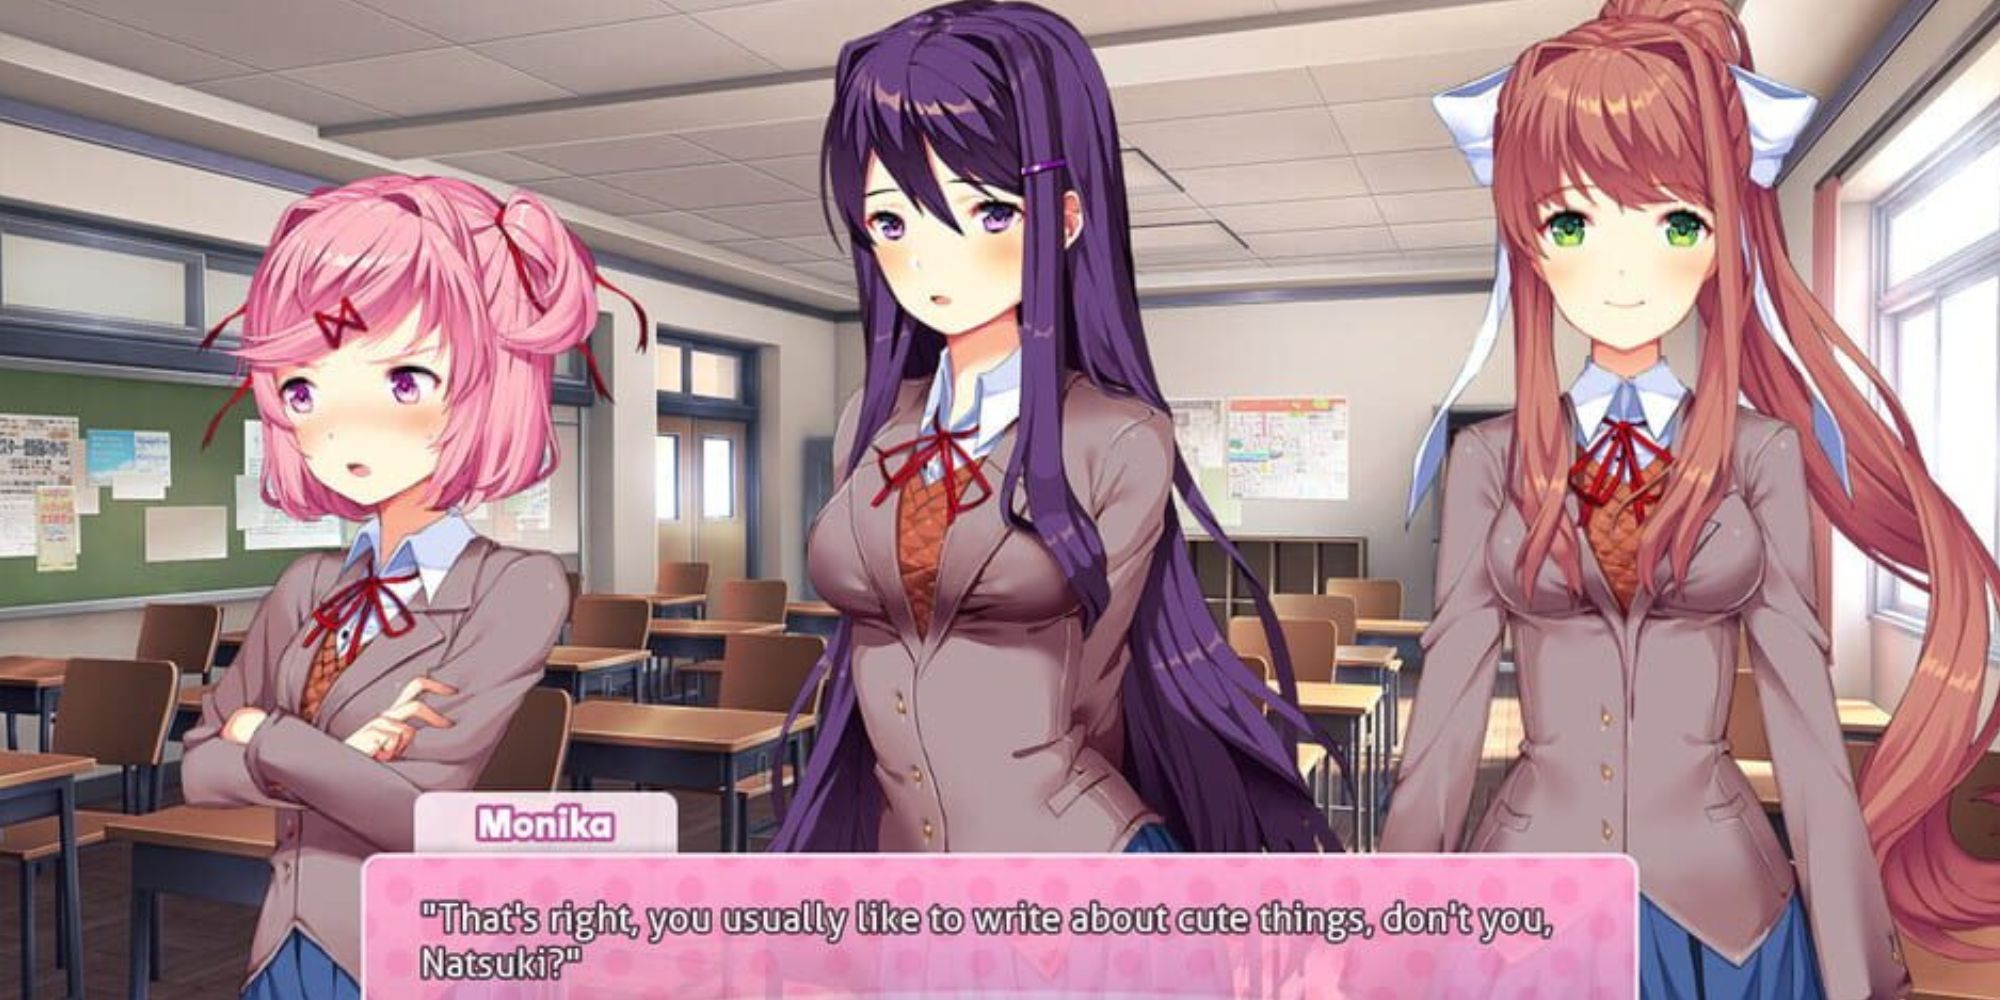 Monika talks to Natsuki in the classroom as Yuri stands in the middle